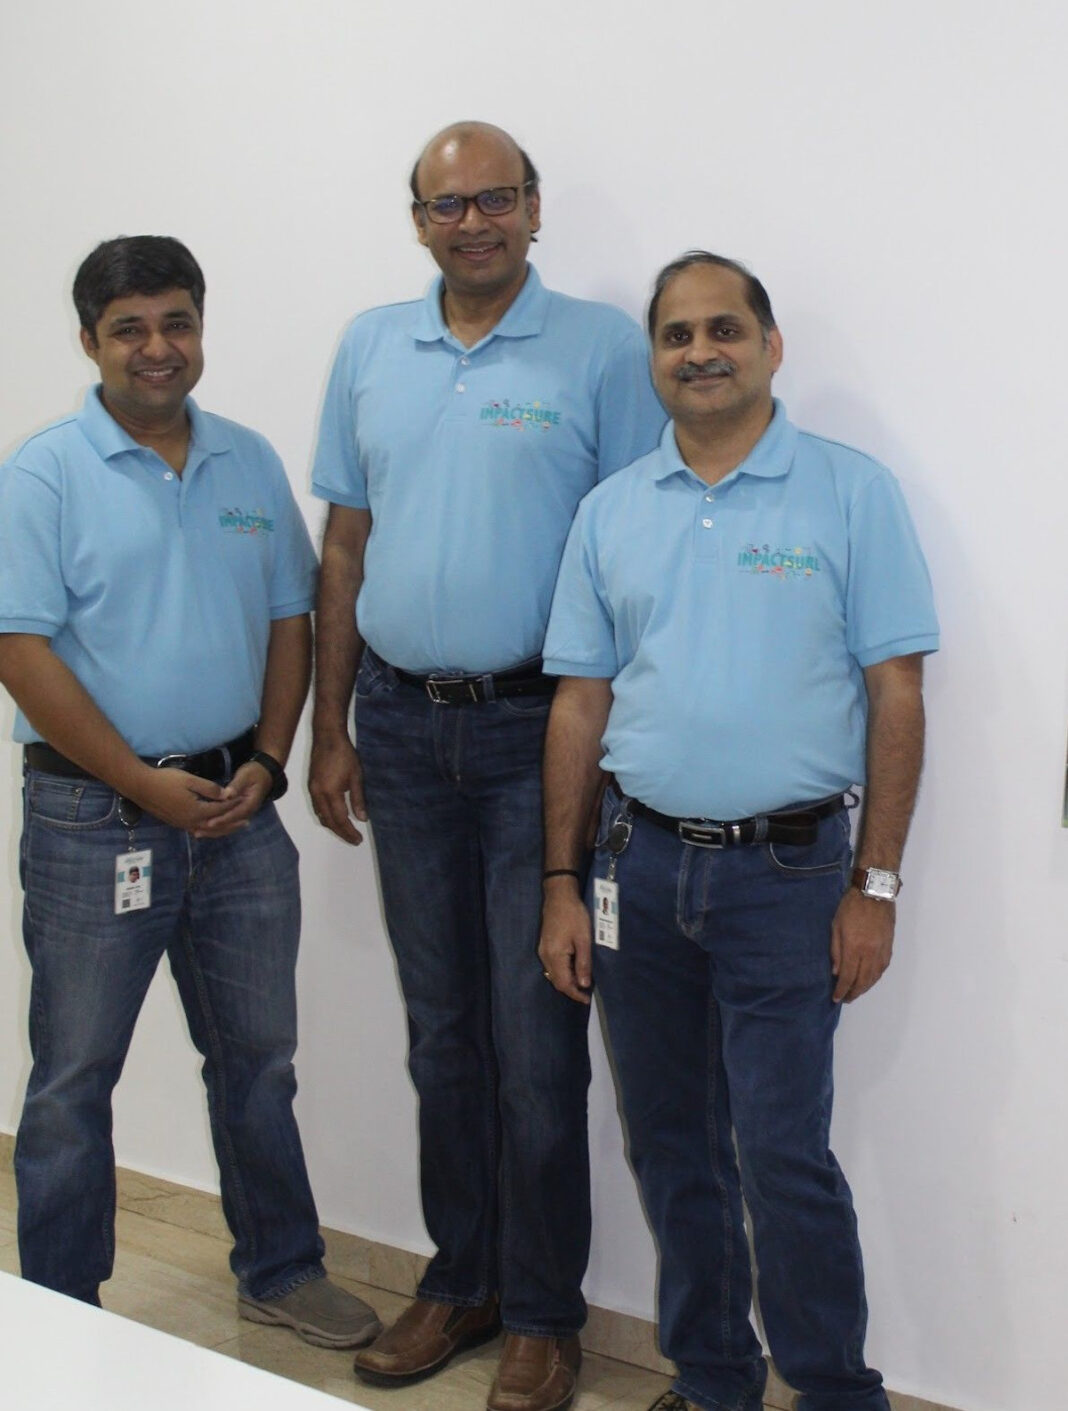 Impactsure Founders - (From left to right) Ashish Jha (Chief Operating Officer), Dharmarajan (CEO) and Subramaniyan Neelakandan (Chief Technical Officer)